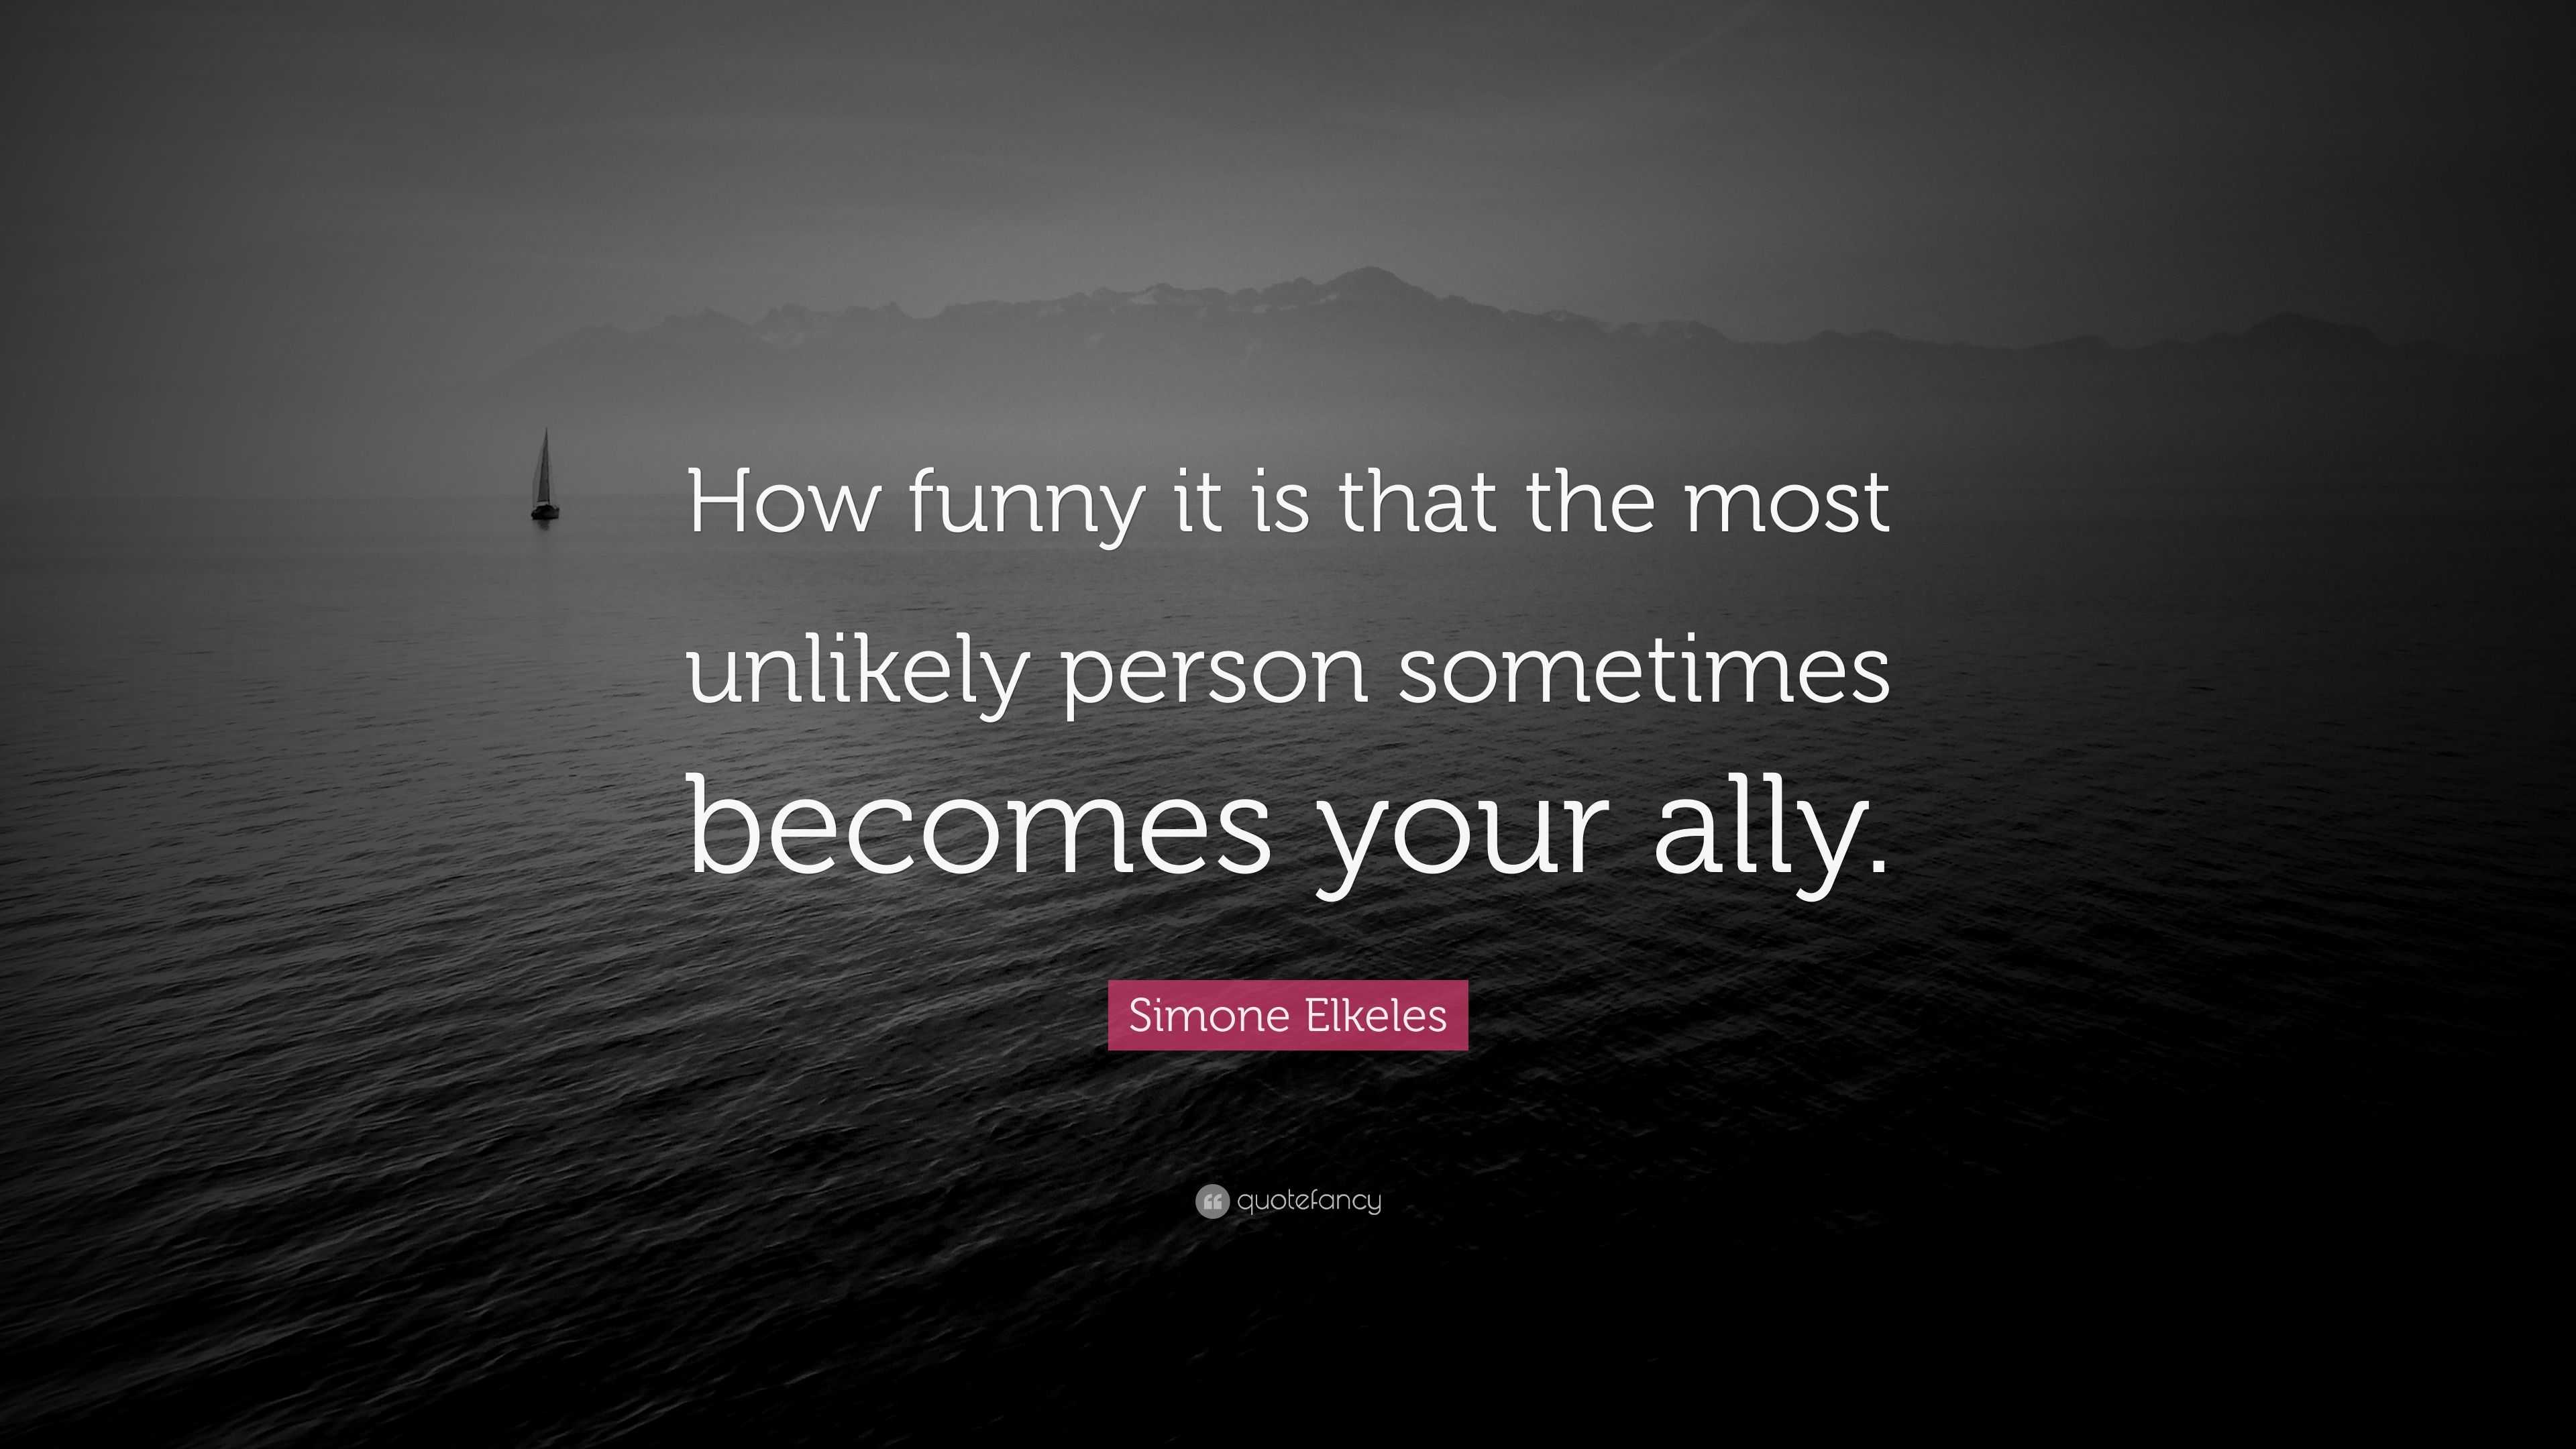 Simone Elkeles Quote: “How funny it is that the most unlikely person ...